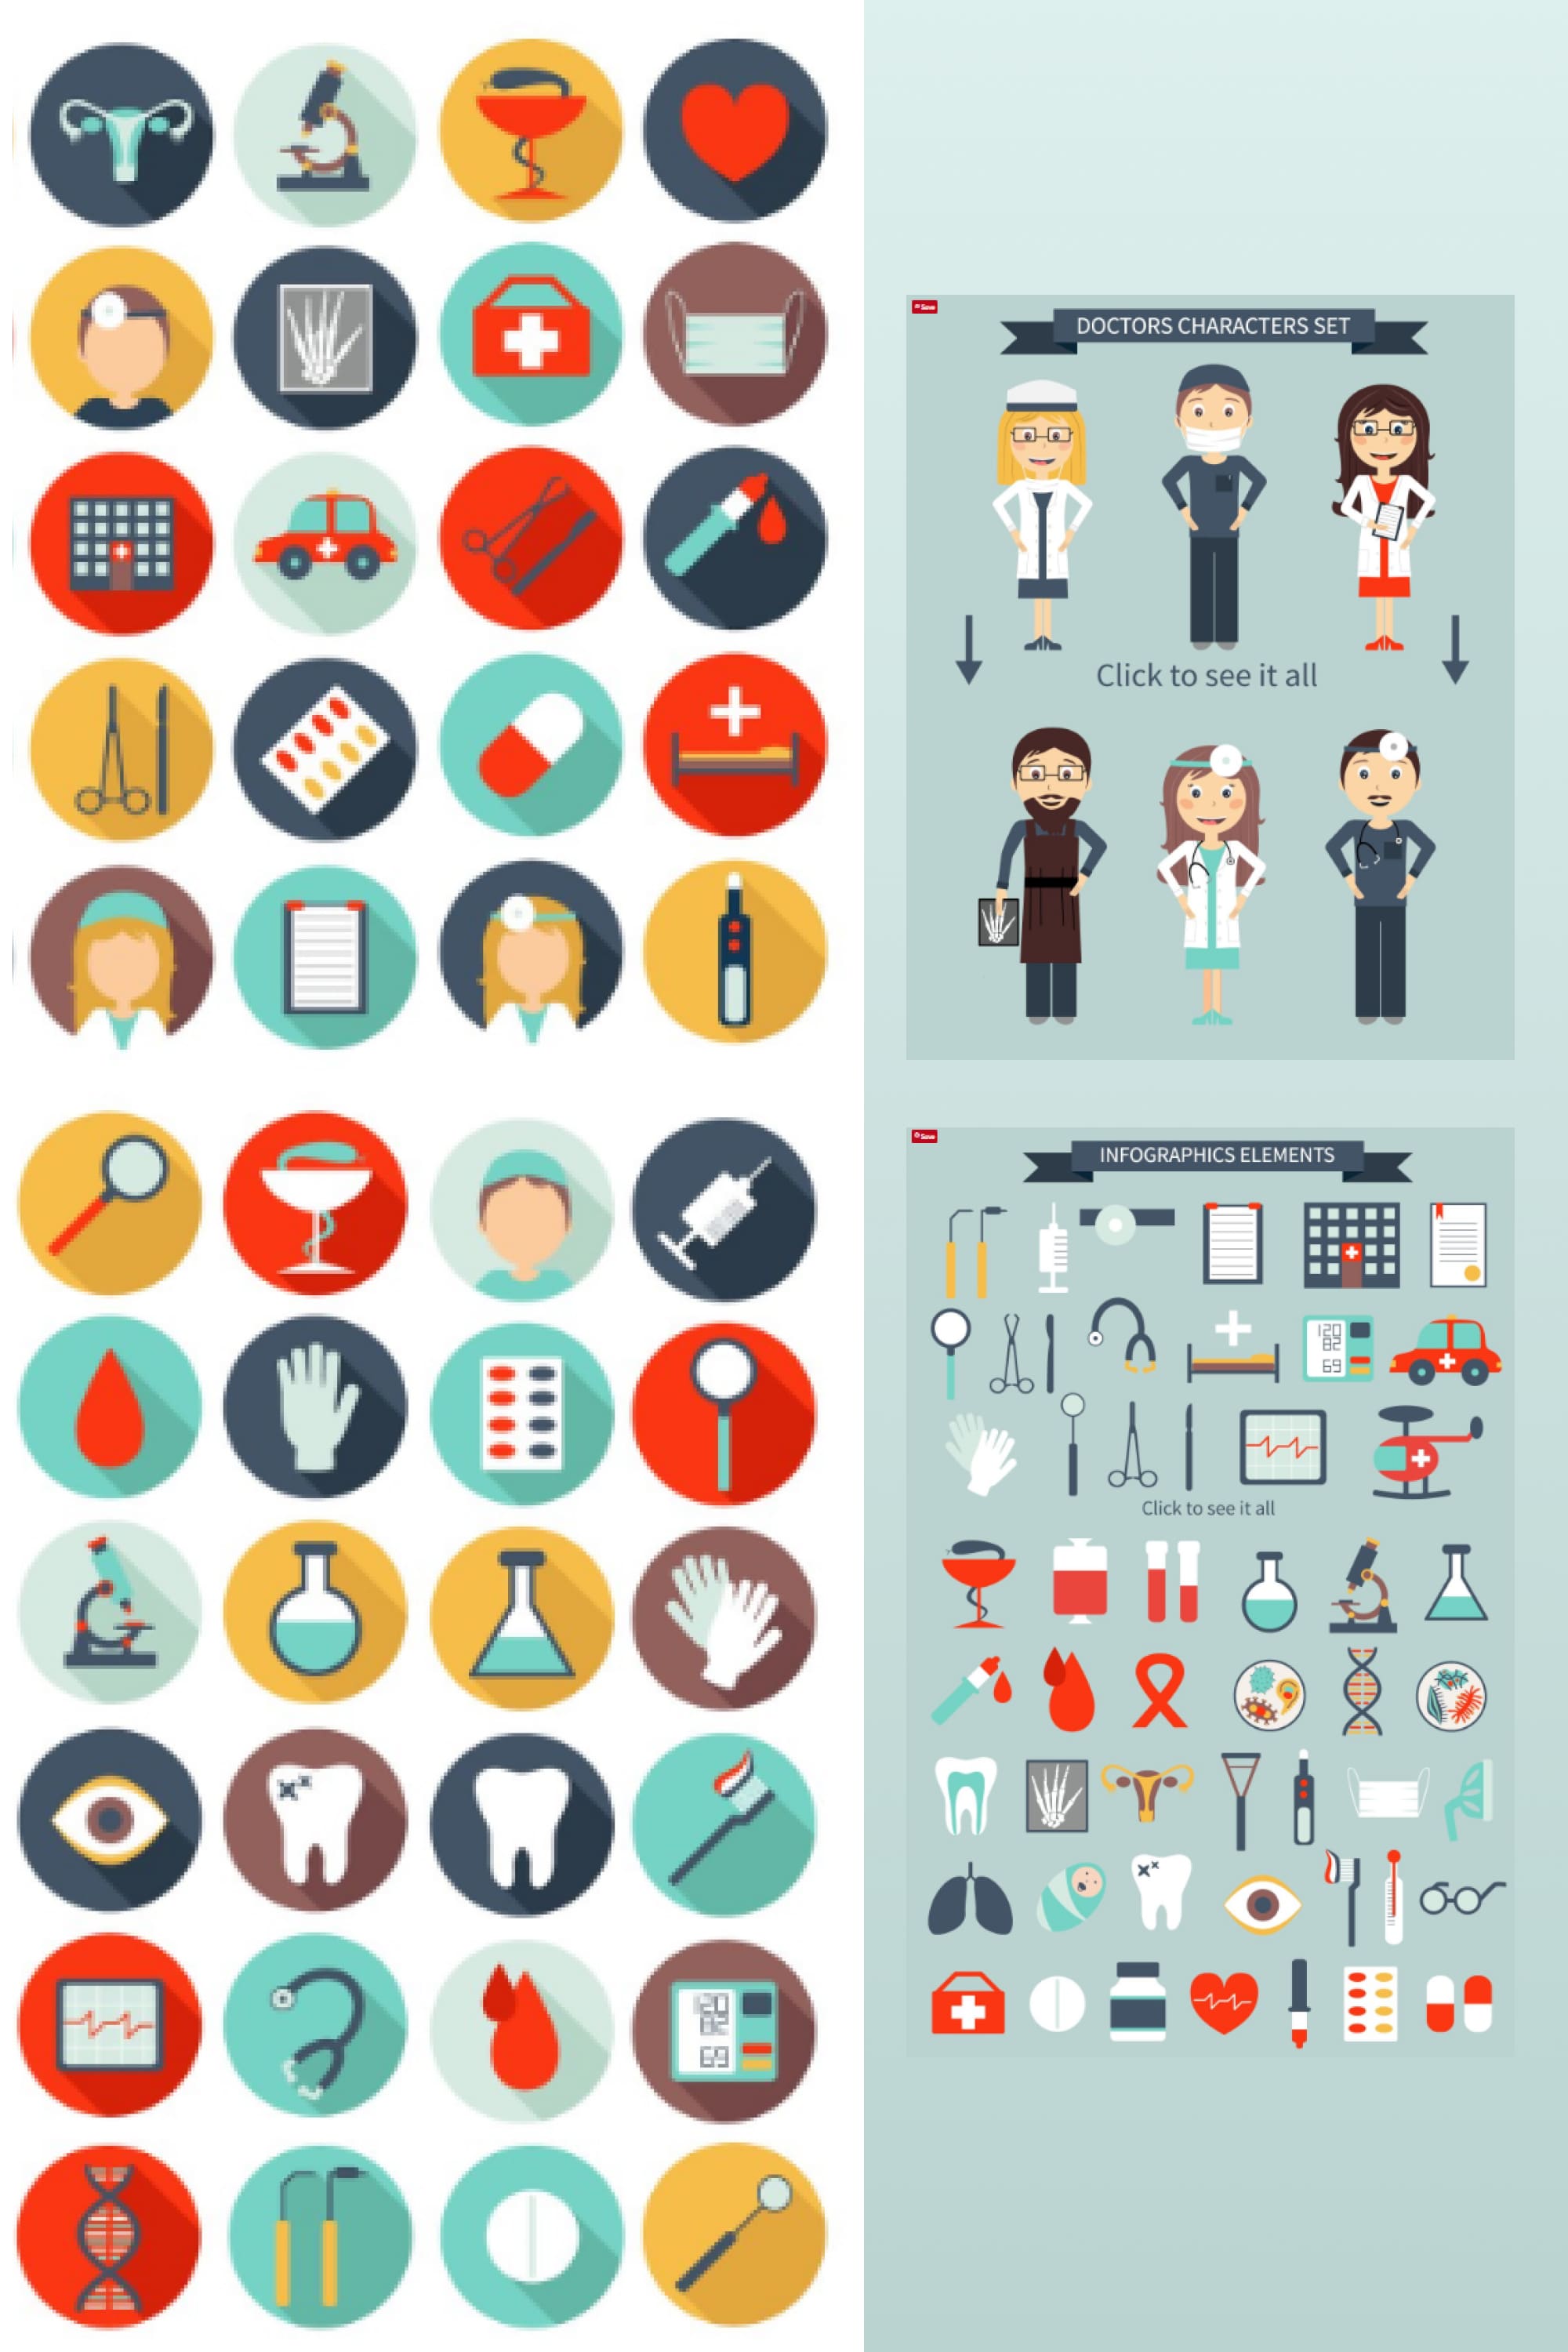 There are 134 elements for medical infographics presented here. They are bright and memorable, thanks to which they can facilitate the delivery of material.